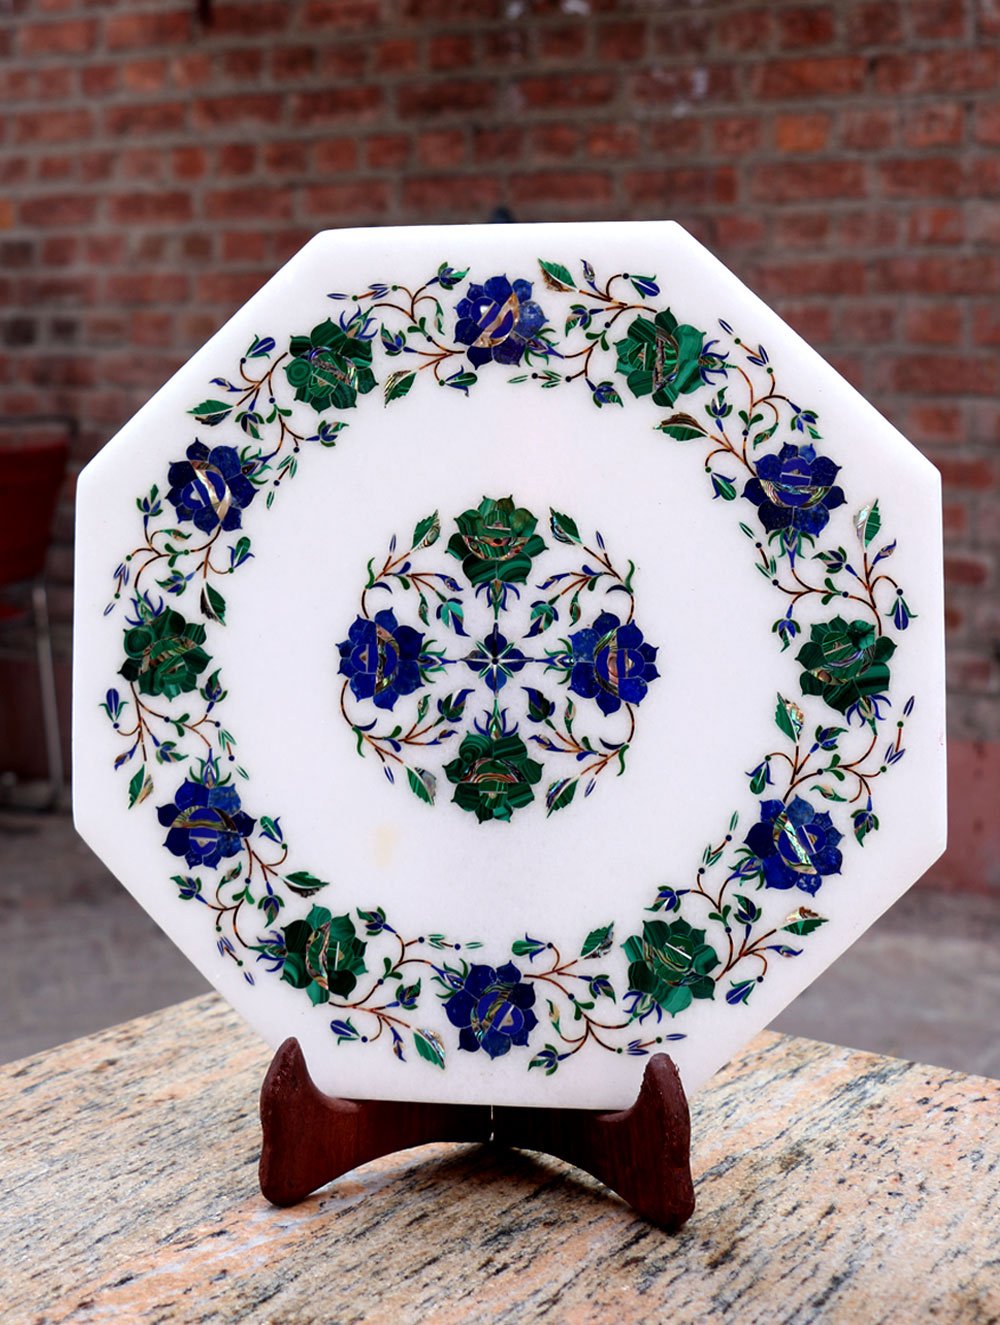 Load image into Gallery viewer, Marble Inlay Round Plate Curio with Stand